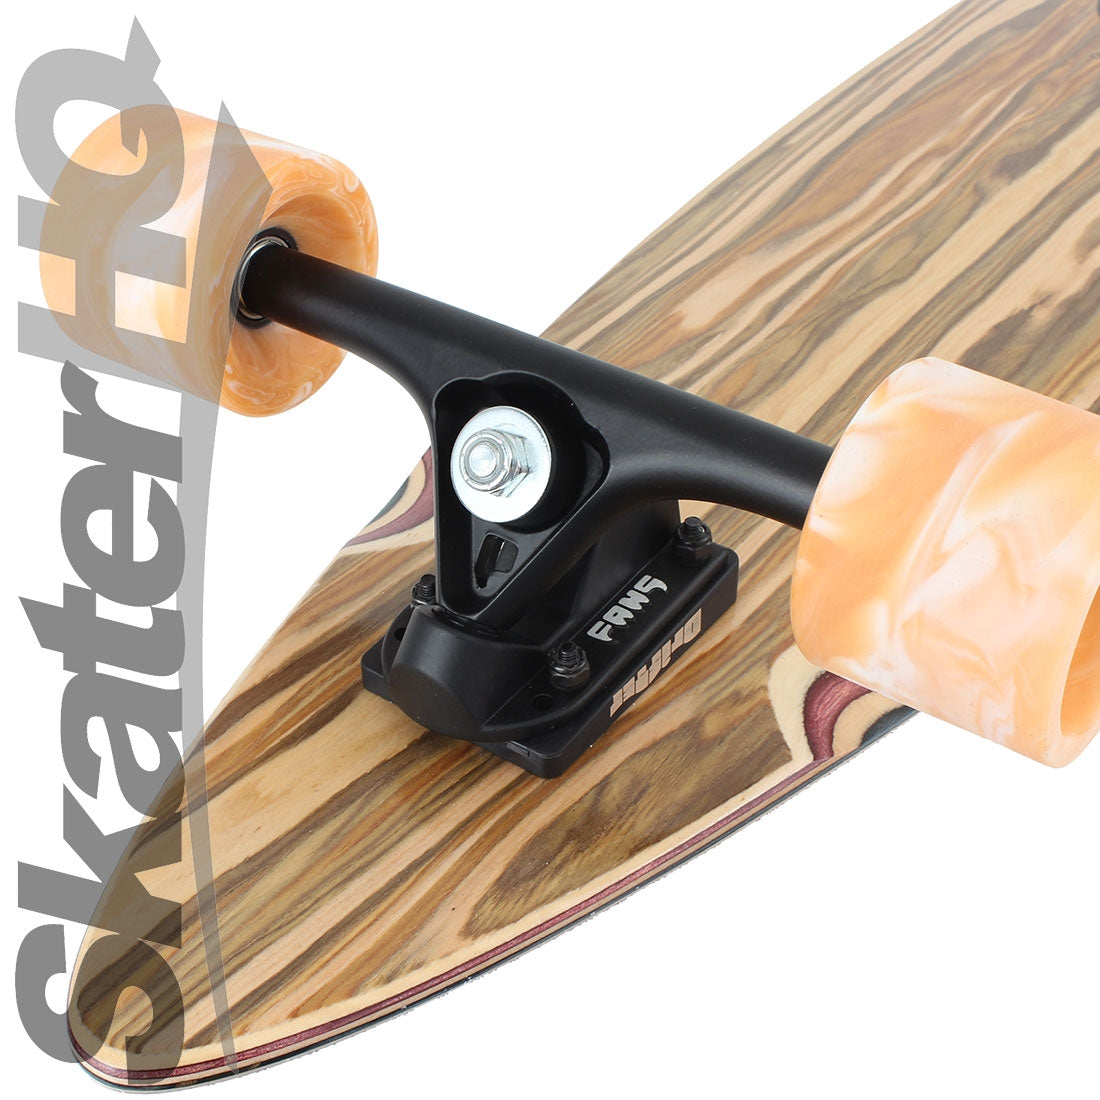 Drifter Pinner 40 Complete - Timber Skateboard Completes Longboards